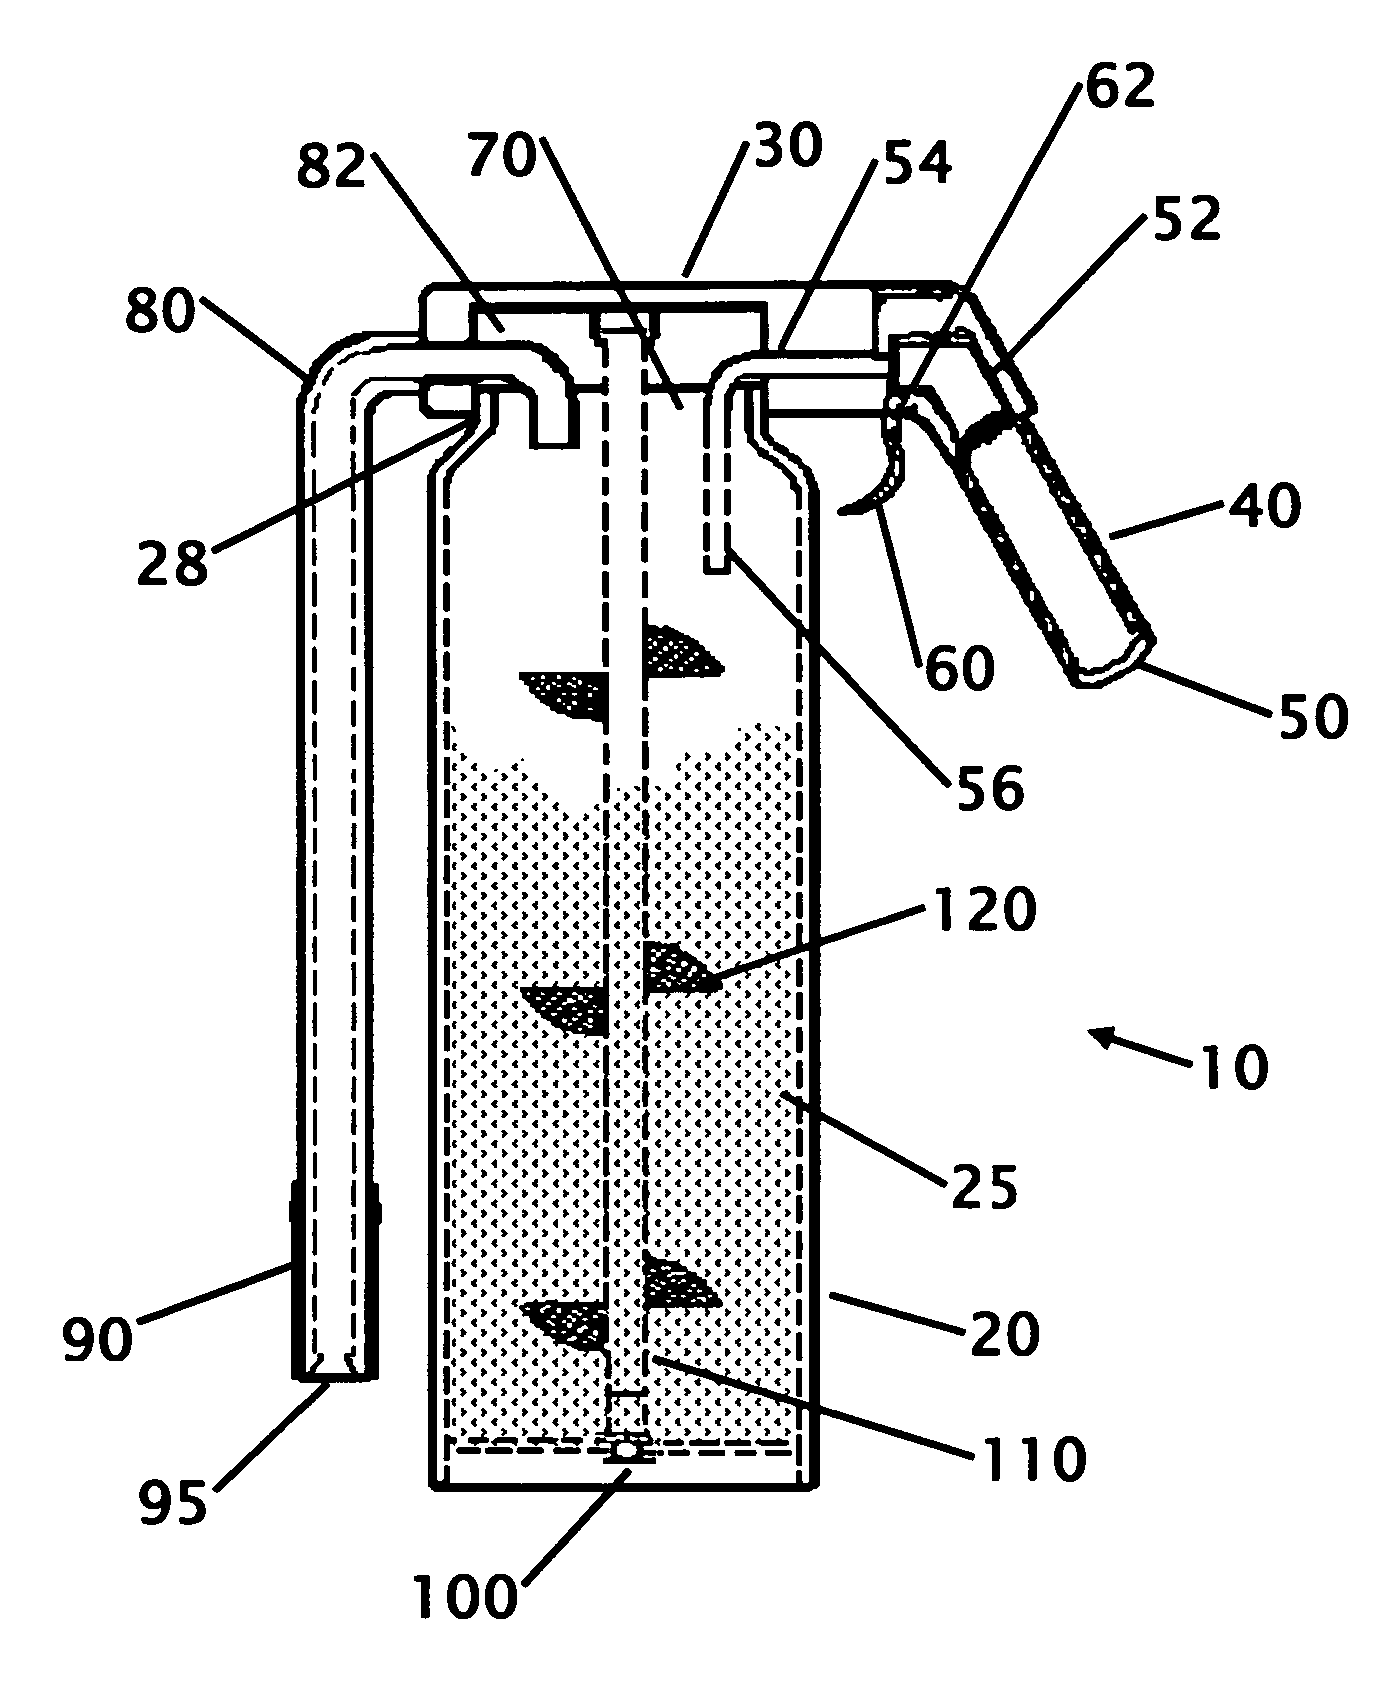 Self servicing fire extinguisher with external operated internal mixing with wide mouth and external CO<sub>2 </sub>chamber